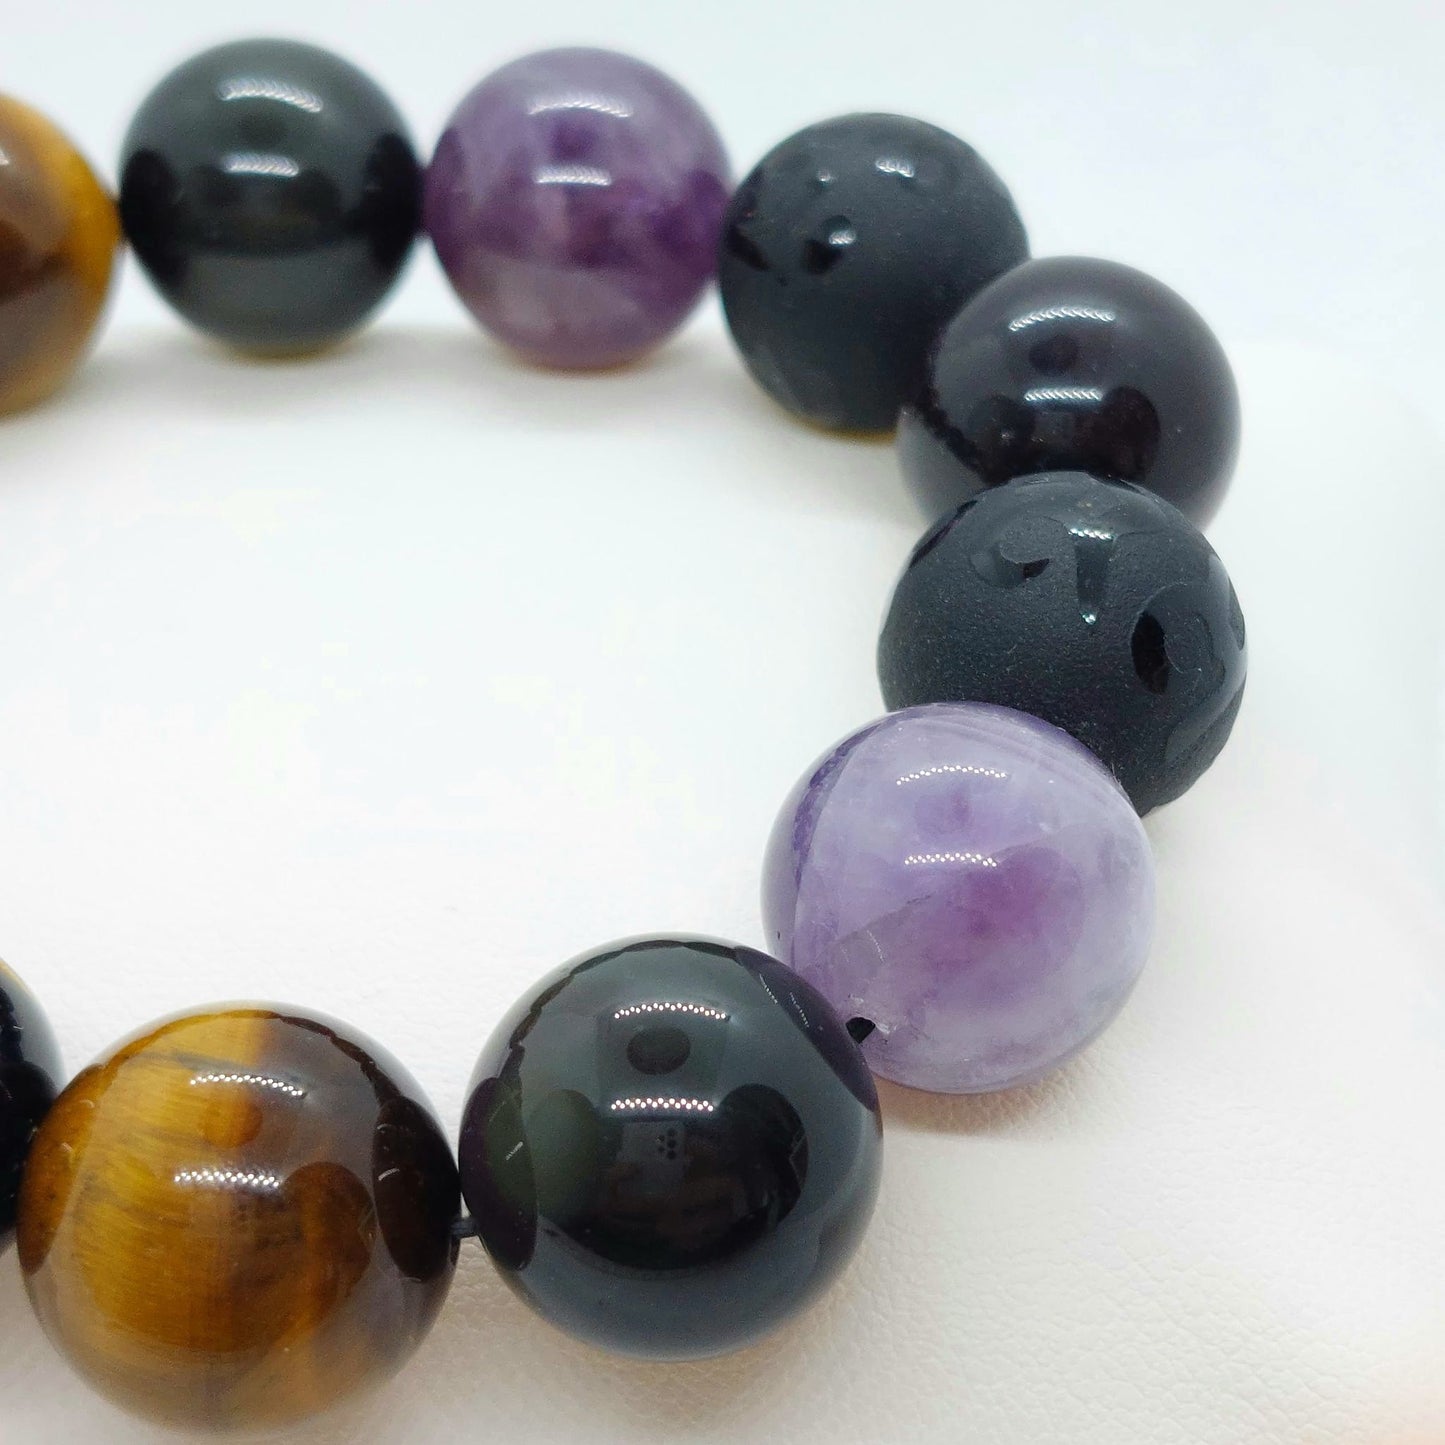 Natural Stone Bracelet with Large Obsidian Pixiu, Amethyst & Tiger Eye in 14 or 16mm Stones